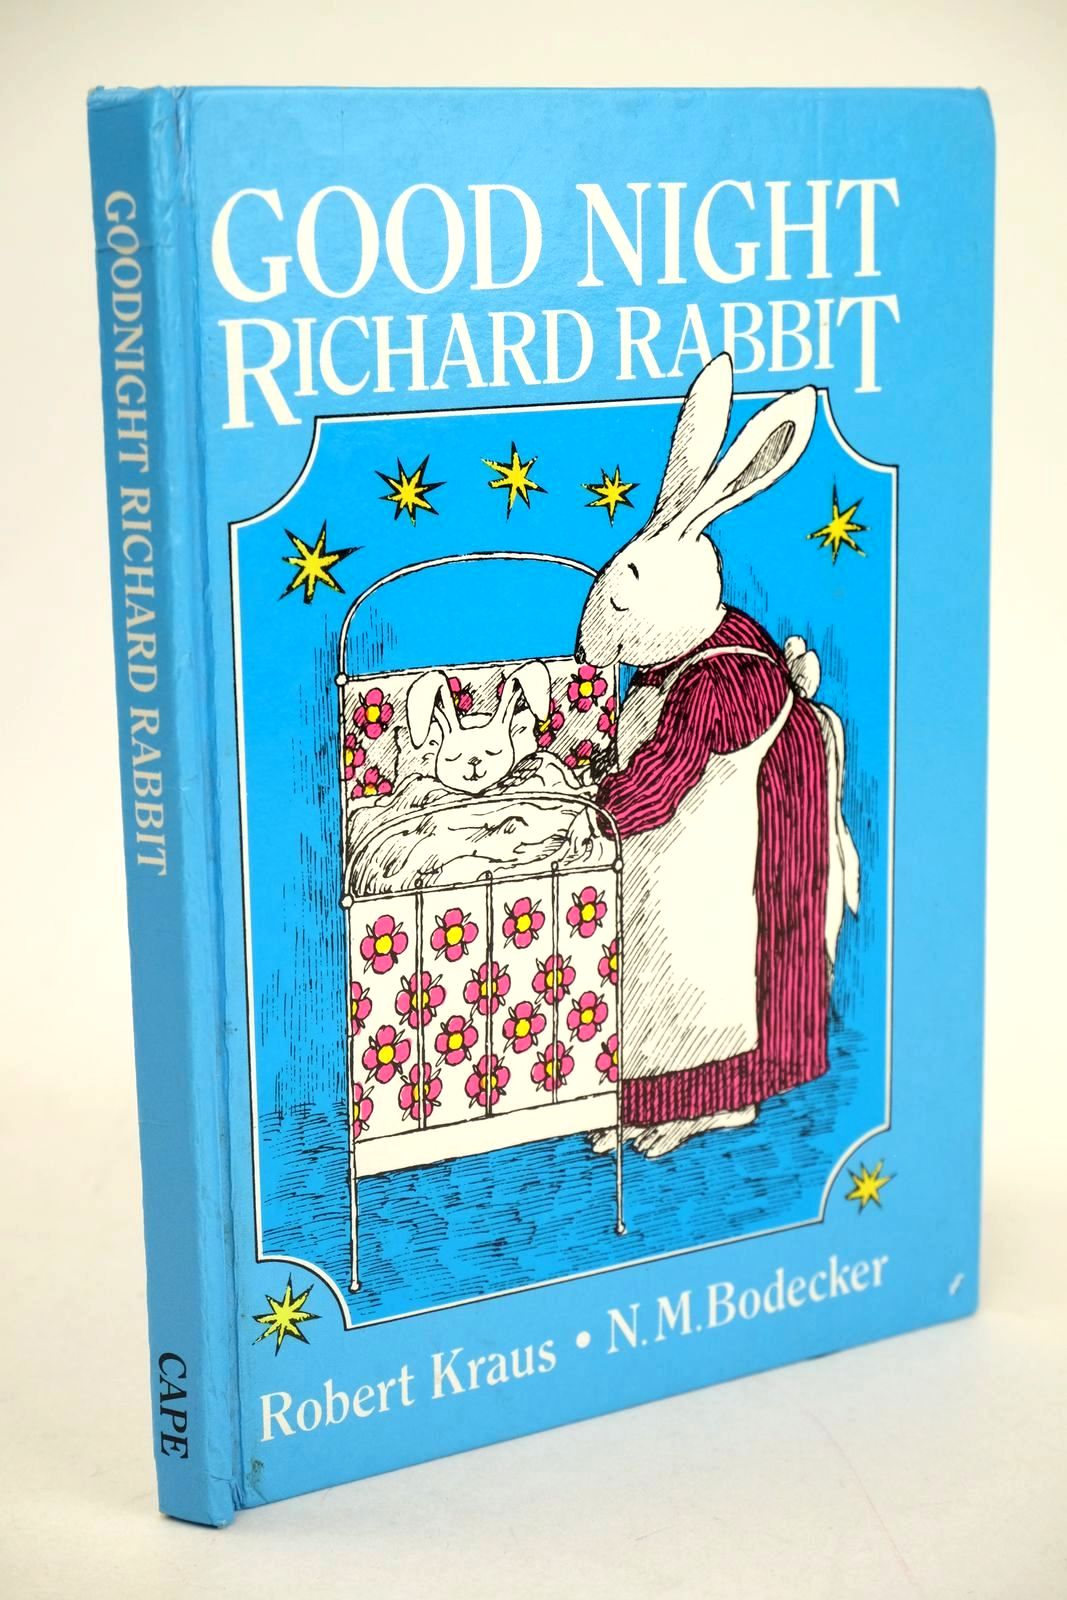 Photo of GOOD NIGHT RICHARD RABBIT written by Kraus, Robert illustrated by Bodecker, N.M. published by Jonathan Cape (STOCK CODE: 1327618)  for sale by Stella & Rose's Books